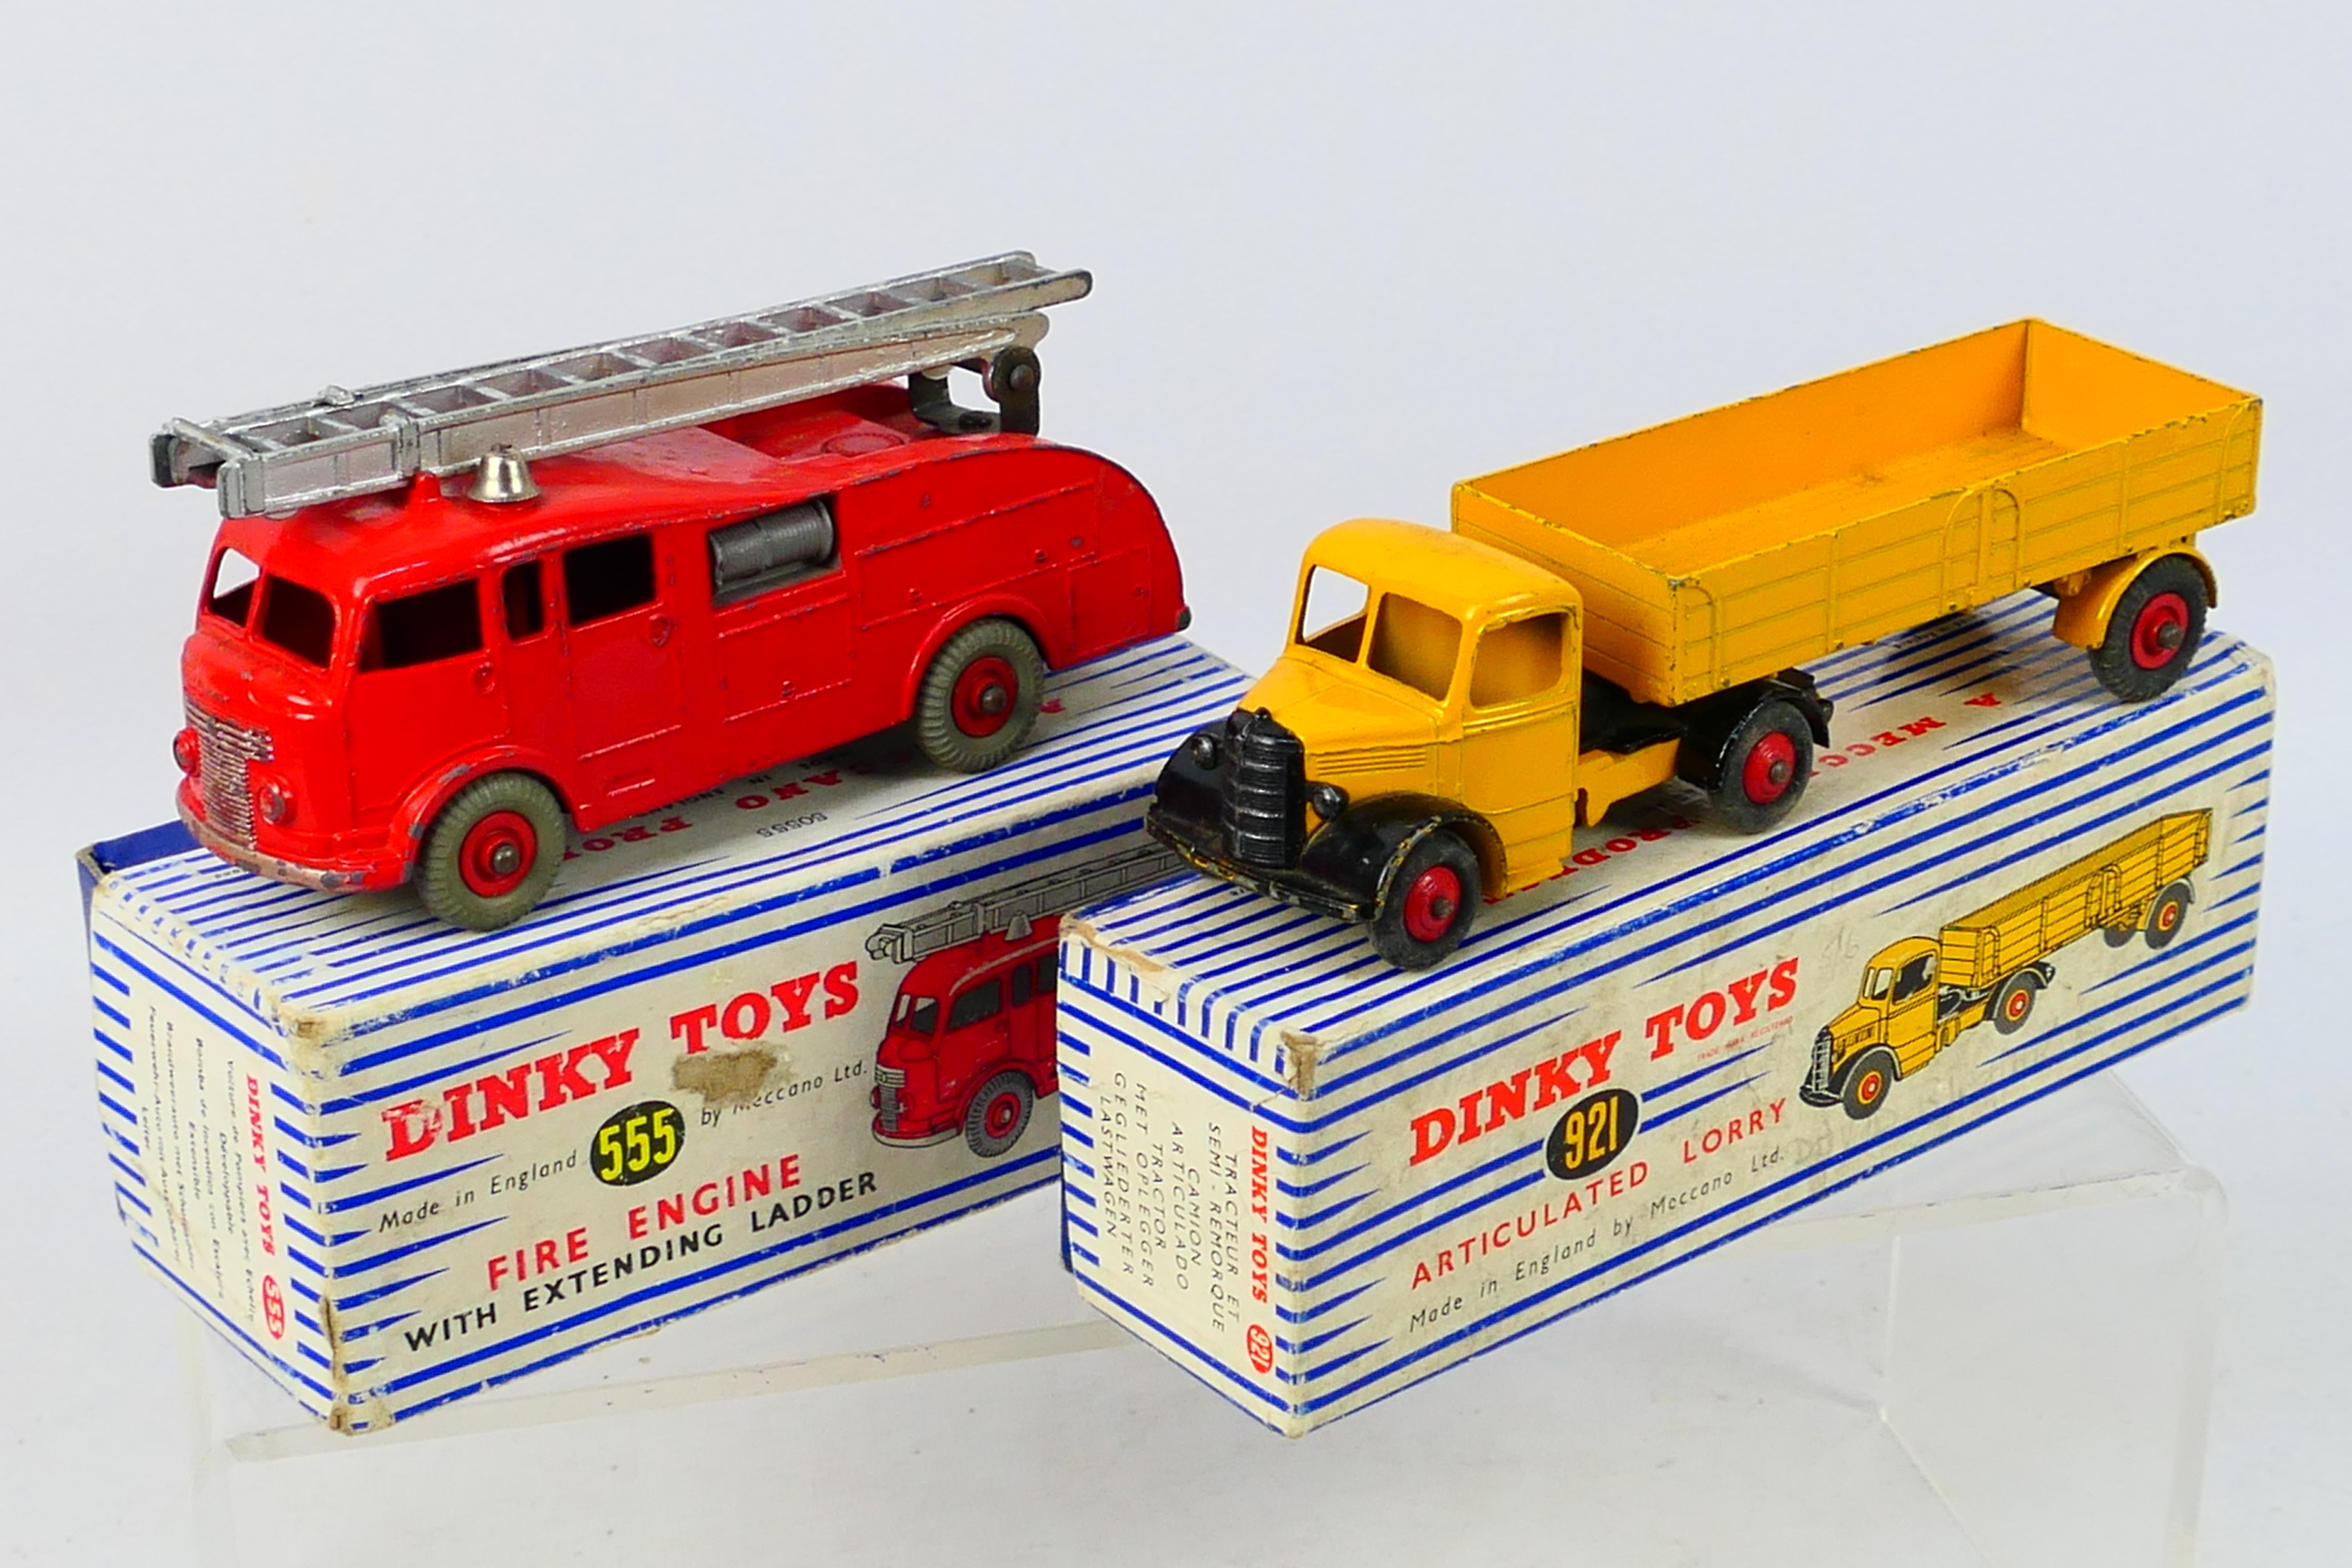 Dinky - 2 x boxed models, a Bedford Articulated Lorry # 921 and a Commer Fire Engine # 555.